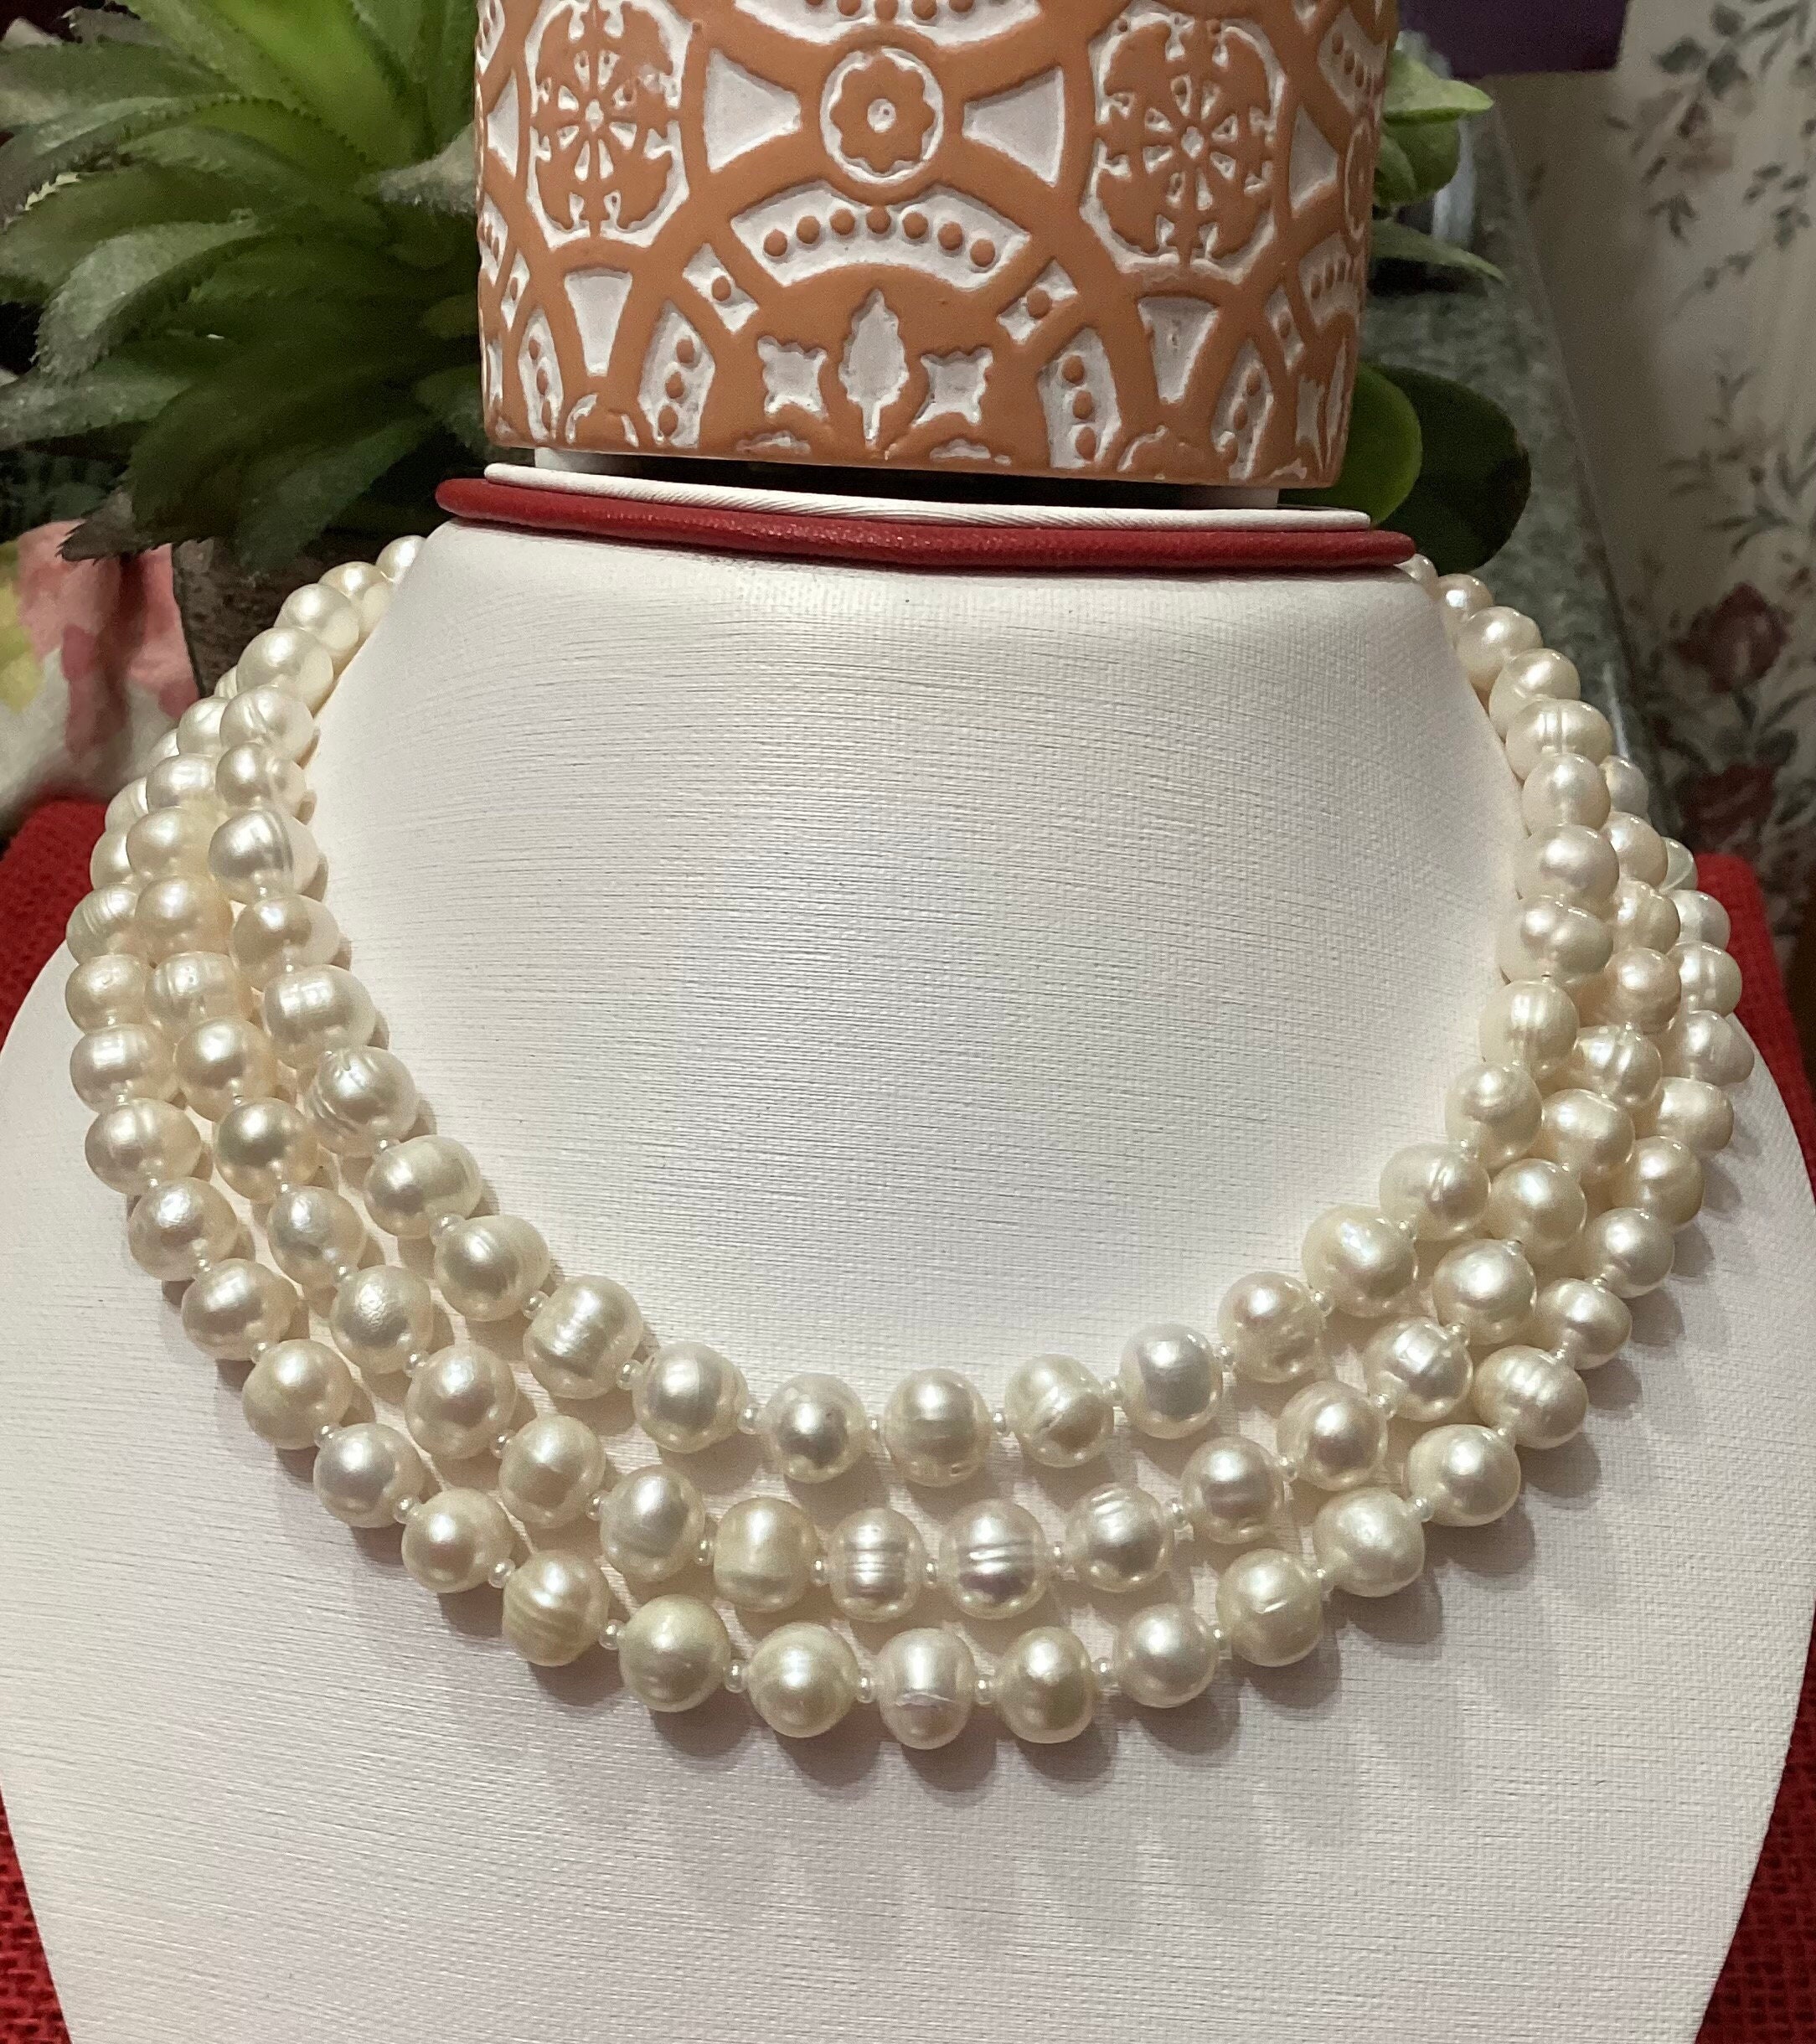 Victorian Pearl Necklace Earrings Set Vintage Style 3 Multi Strands Crystal  Pearls in Ivory or White and Silver or Gold Wedding Jewelry Gift 